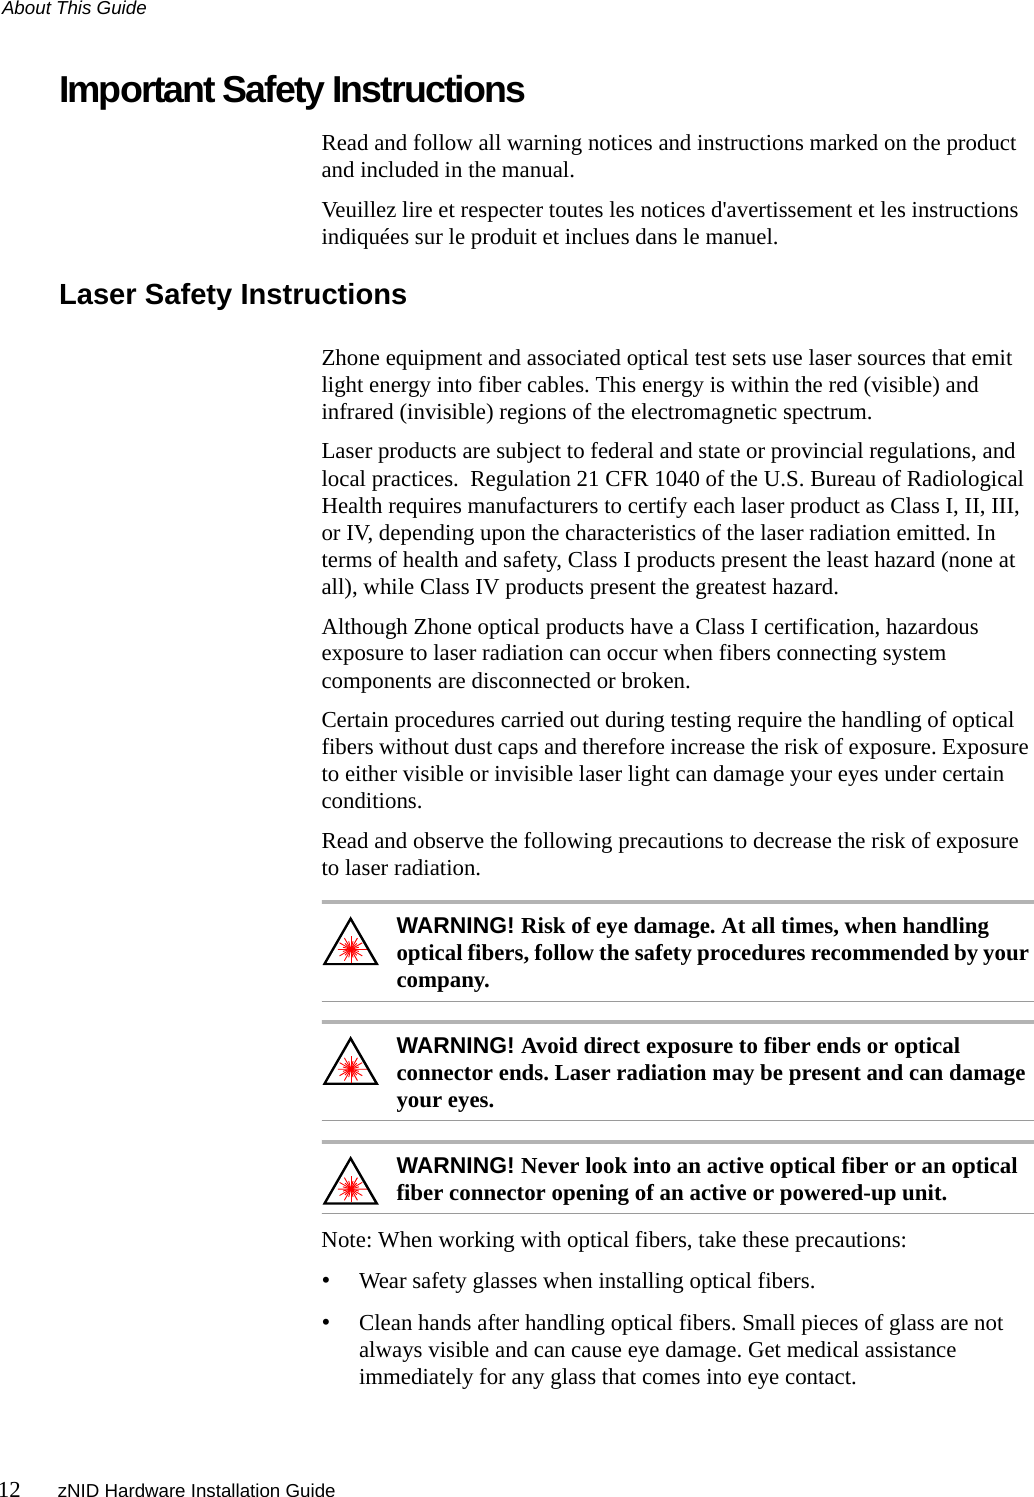 About This Guide12 zNID Hardware Installation GuideImportant Safety InstructionsRead and follow all warning notices and instructions marked on the product and included in the manual.Veuillez lire et respecter toutes les notices d&apos;avertissement et les instructions indiquées sur le produit et inclues dans le manuel.Laser Safety InstructionsZhone equipment and associated optical test sets use laser sources that emit light energy into fiber cables. This energy is within the red (visible) and infrared (invisible) regions of the electromagnetic spectrum.Laser products are subject to federal and state or provincial regulations, and local practices.  Regulation 21 CFR 1040 of the U.S. Bureau of Radiological Health requires manufacturers to certify each laser product as Class I, II, III, or IV, depending upon the characteristics of the laser radiation emitted. In terms of health and safety, Class I products present the least hazard (none at all), while Class IV products present the greatest hazard.Although Zhone optical products have a Class I certification, hazardous exposure to laser radiation can occur when fibers connecting system components are disconnected or broken.Certain procedures carried out during testing require the handling of optical fibers without dust caps and therefore increase the risk of exposure. Exposure to either visible or invisible laser light can damage your eyes under certain conditions.Read and observe the following precautions to decrease the risk of exposure to laser radiation.WARNING! Risk of eye damage. At all times, when handling optical fibers, follow the safety procedures recommended by your company.WARNING! Avoid direct exposure to fiber ends or optical connector ends. Laser radiation may be present and can damage your eyes.WARNING! Never look into an active optical fiber or an optical fiber connector opening of an active or powered-up unit.Note: When working with optical fibers, take these precautions:•Wear safety glasses when installing optical fibers.•Clean hands after handling optical fibers. Small pieces of glass are not always visible and can cause eye damage. Get medical assistance immediately for any glass that comes into eye contact.